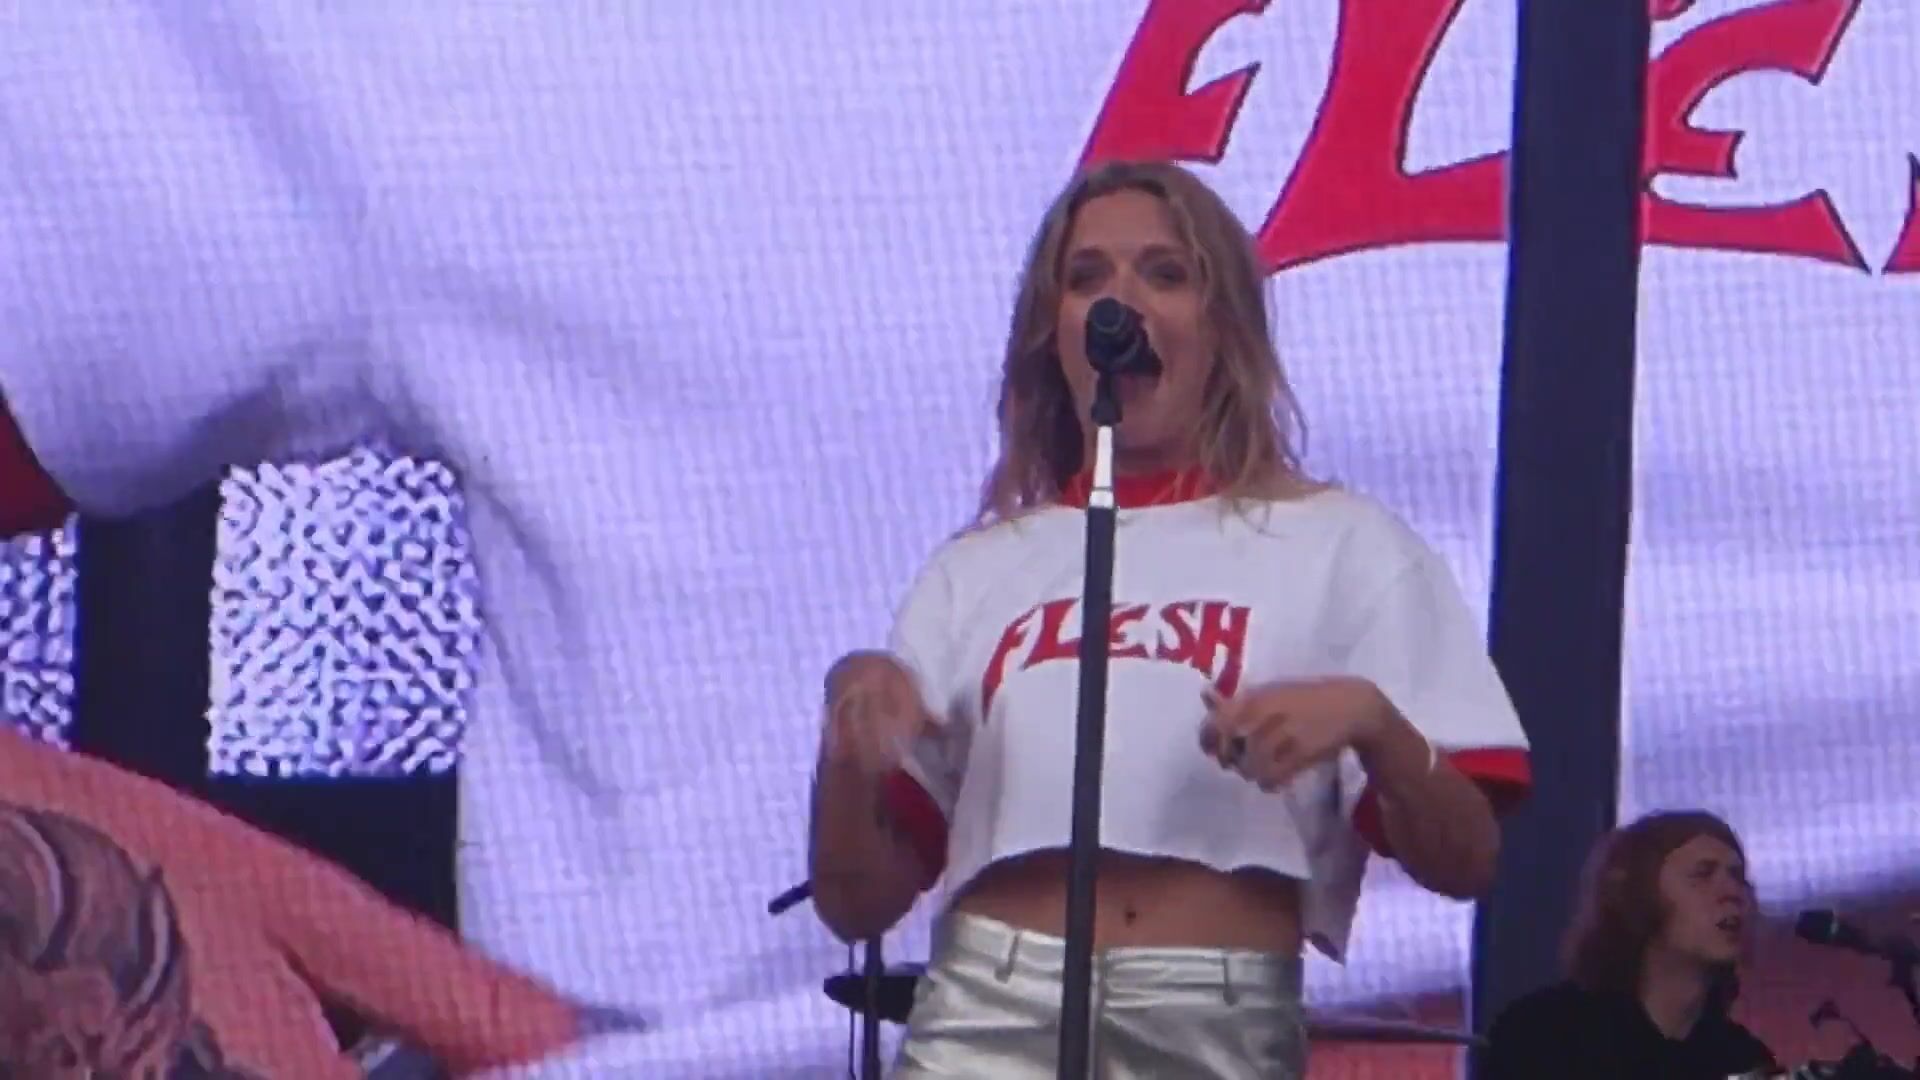 Olderwoman Concert moments full of shame and excitement when Tove Lo nude exposes boobies on stage Verga - 1